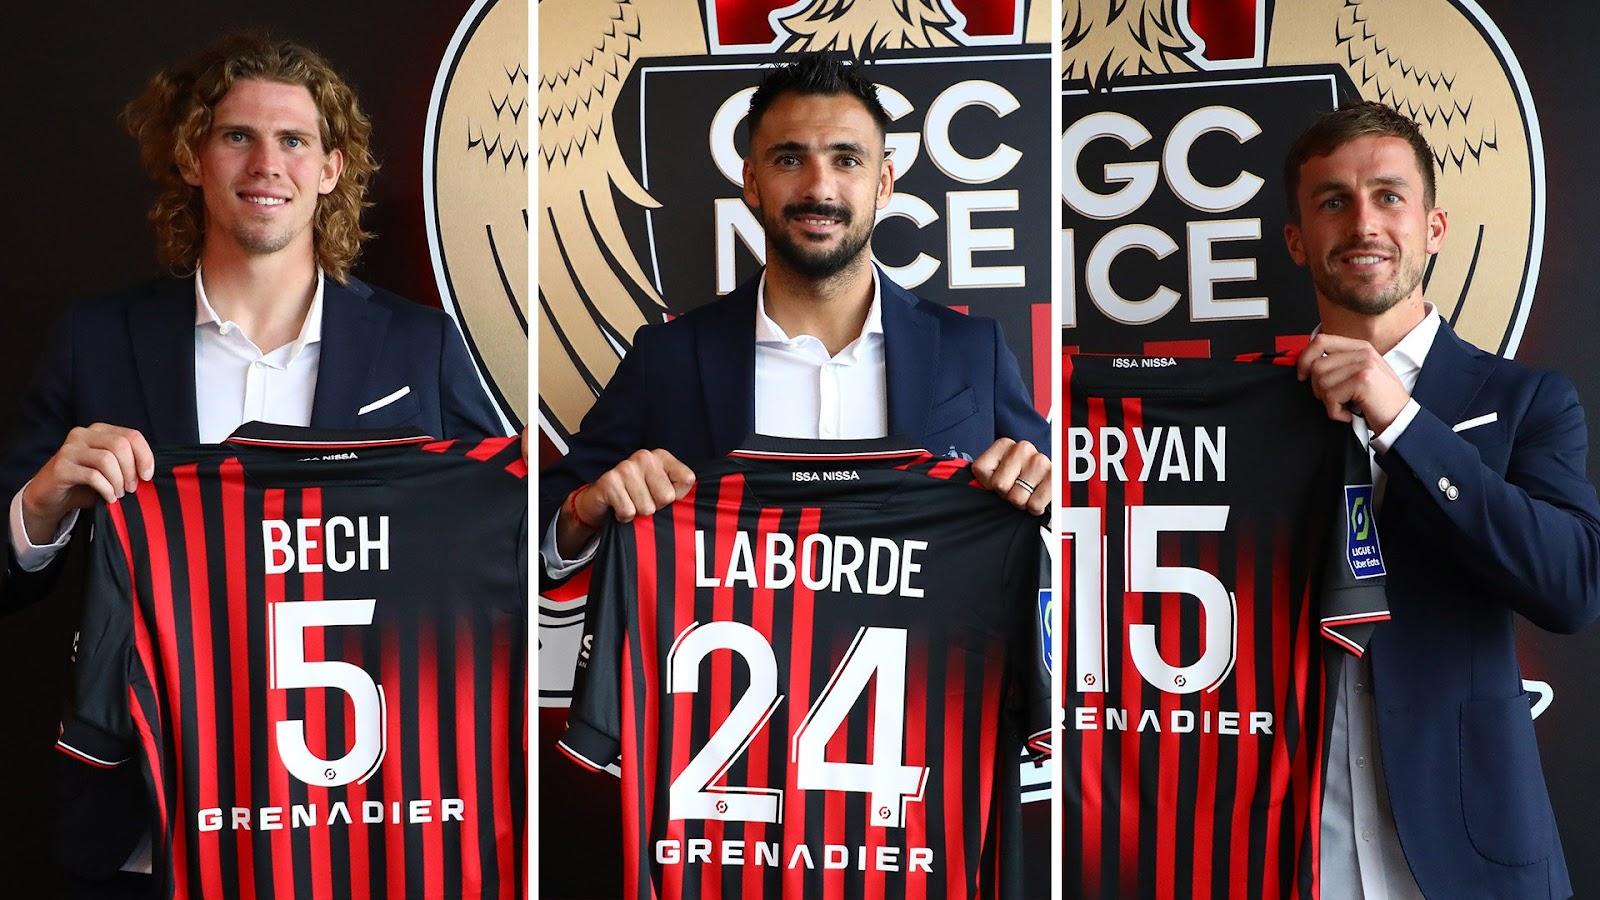 Summer signings Bech, Laborde and Bryan will all have a role to play against Koln